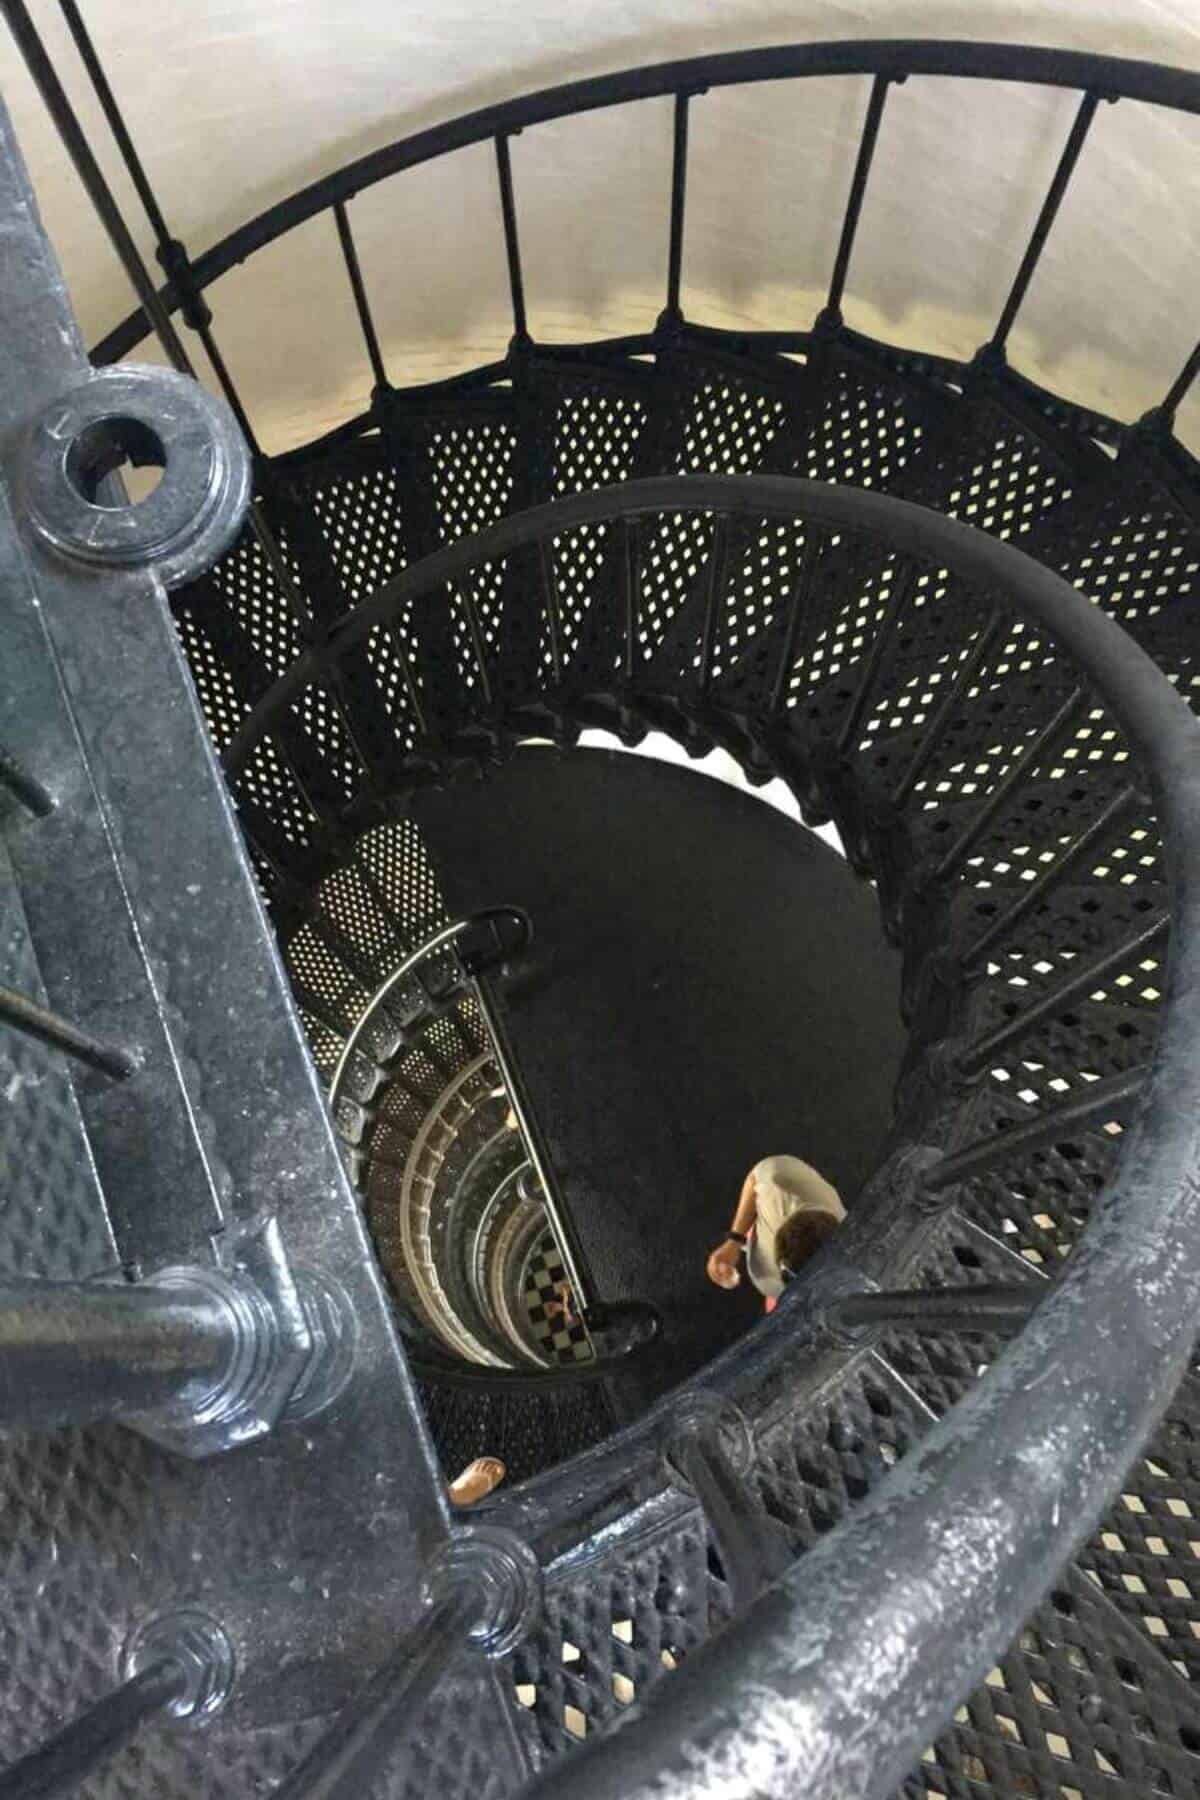 Spiral staircase in the lighthouse.